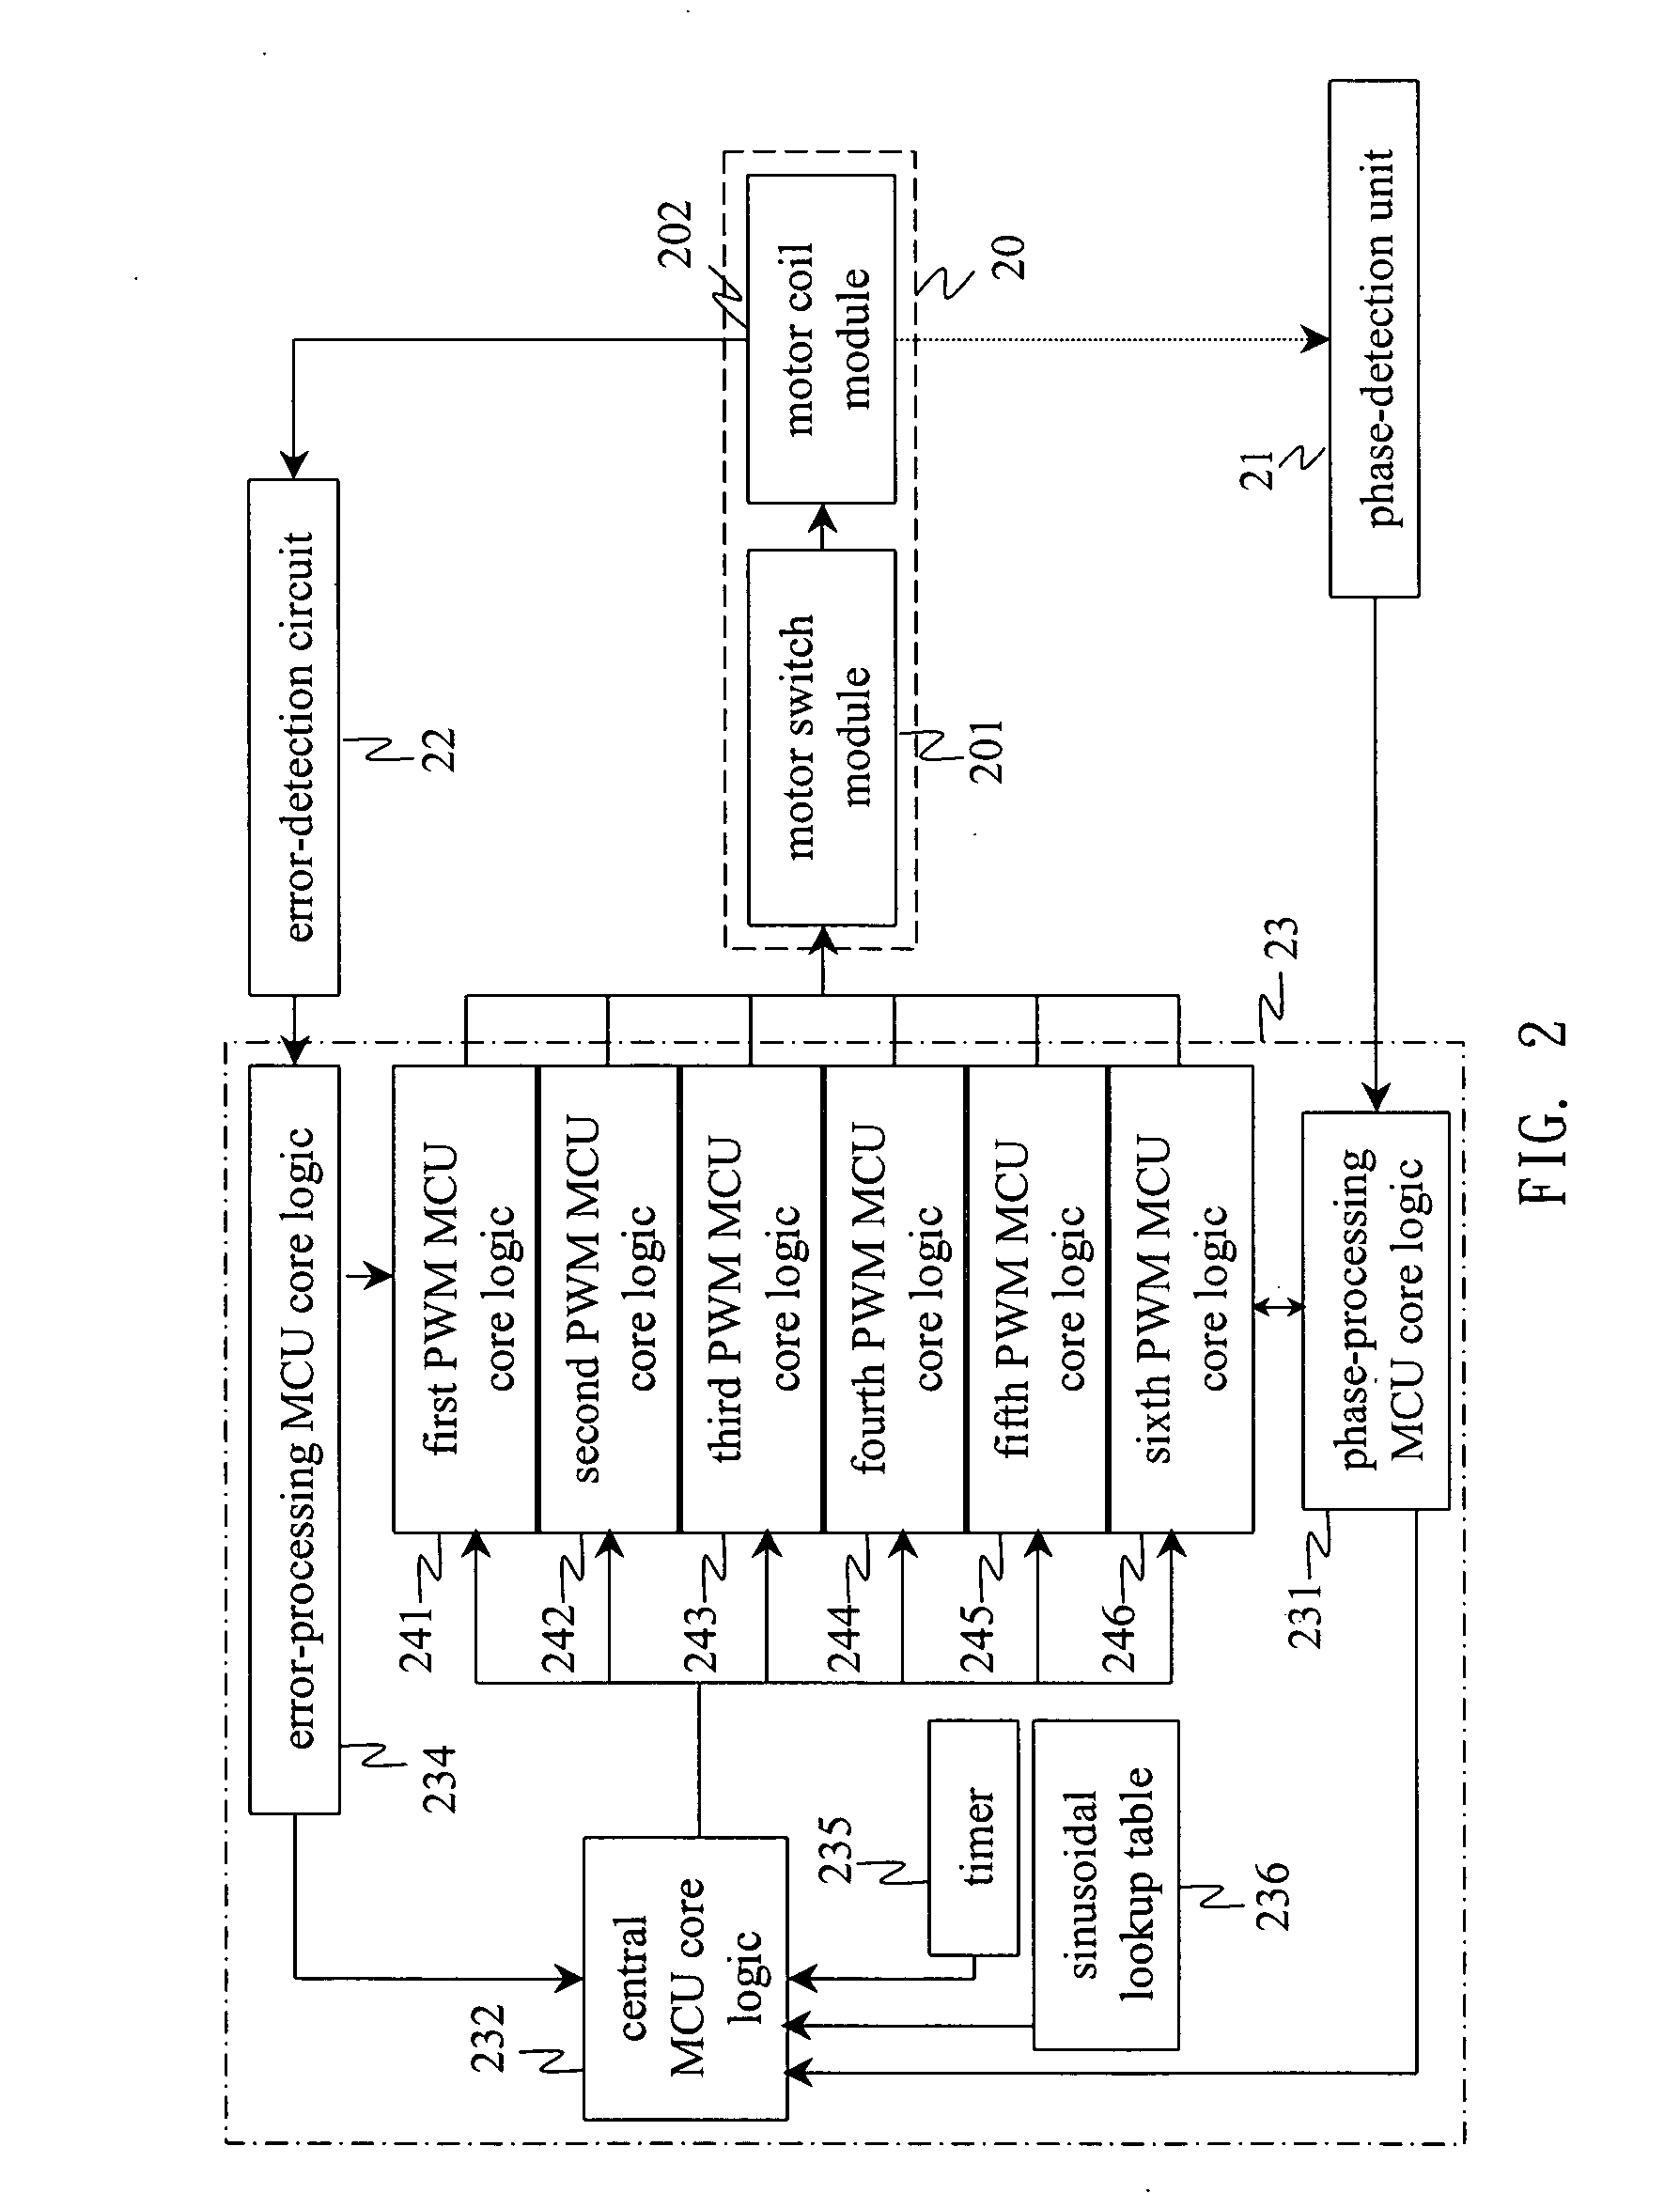 Real-time responsive motor control system